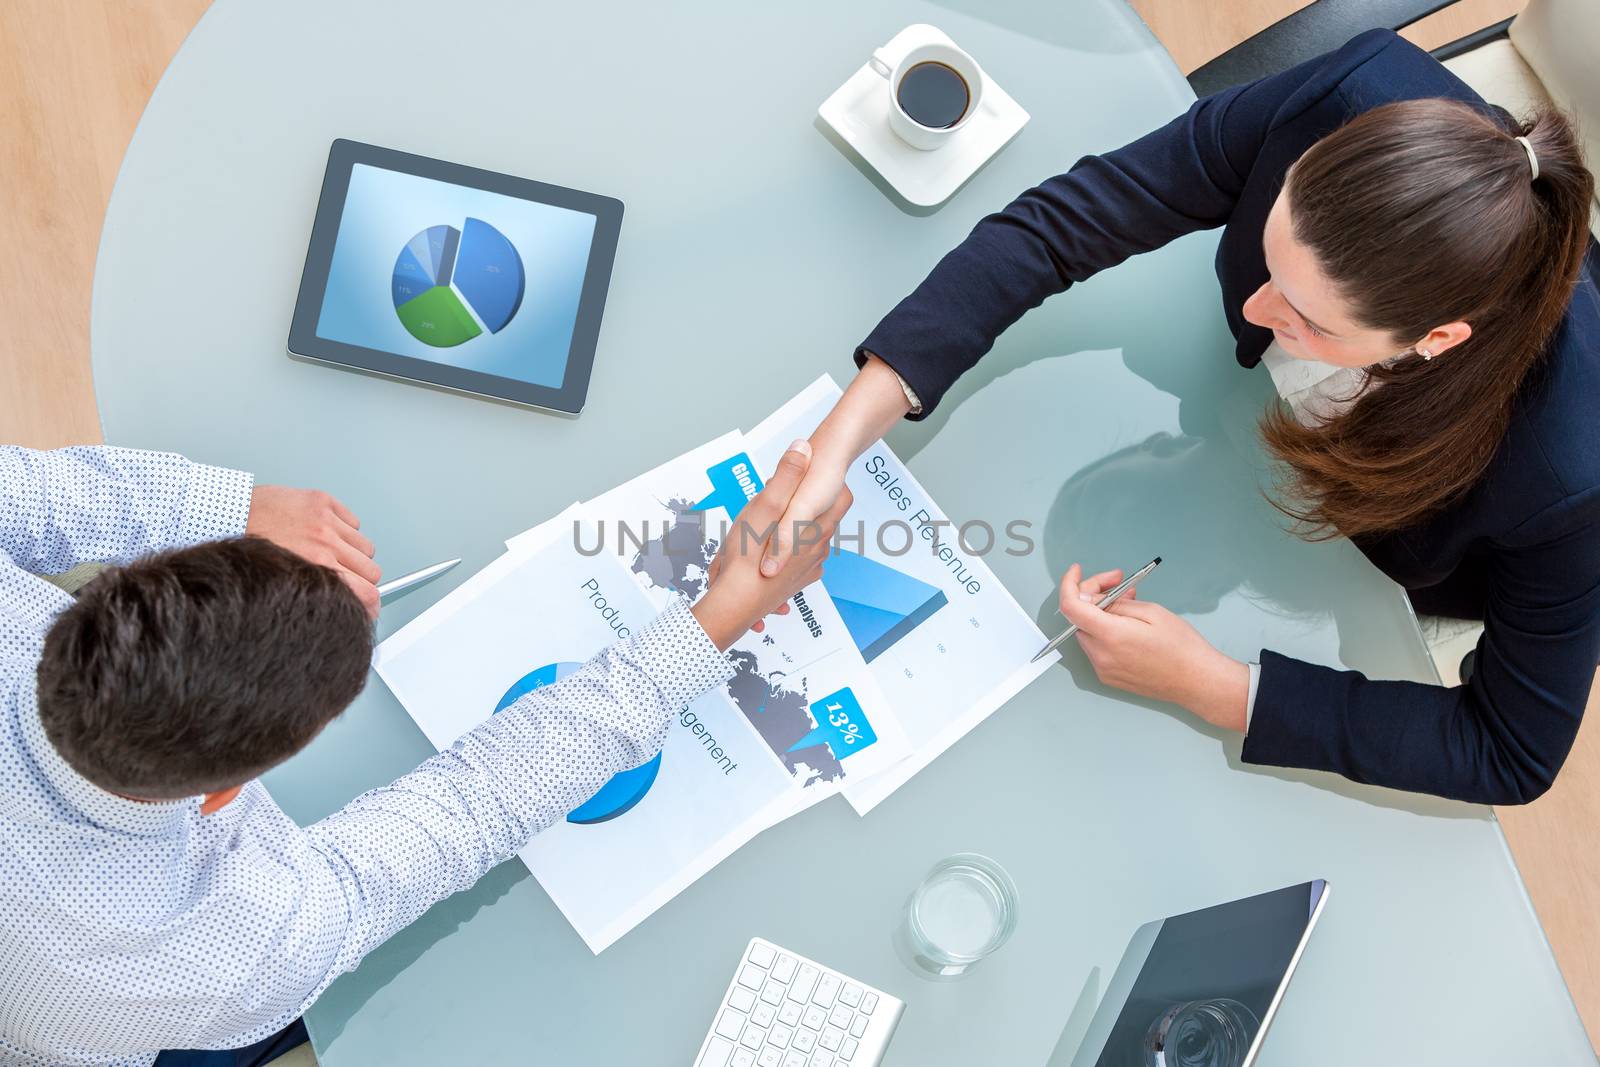 Top view of young business partners shaking hands on deal at desk in office.Documents and digital tablet on table showing statistics and graphics.